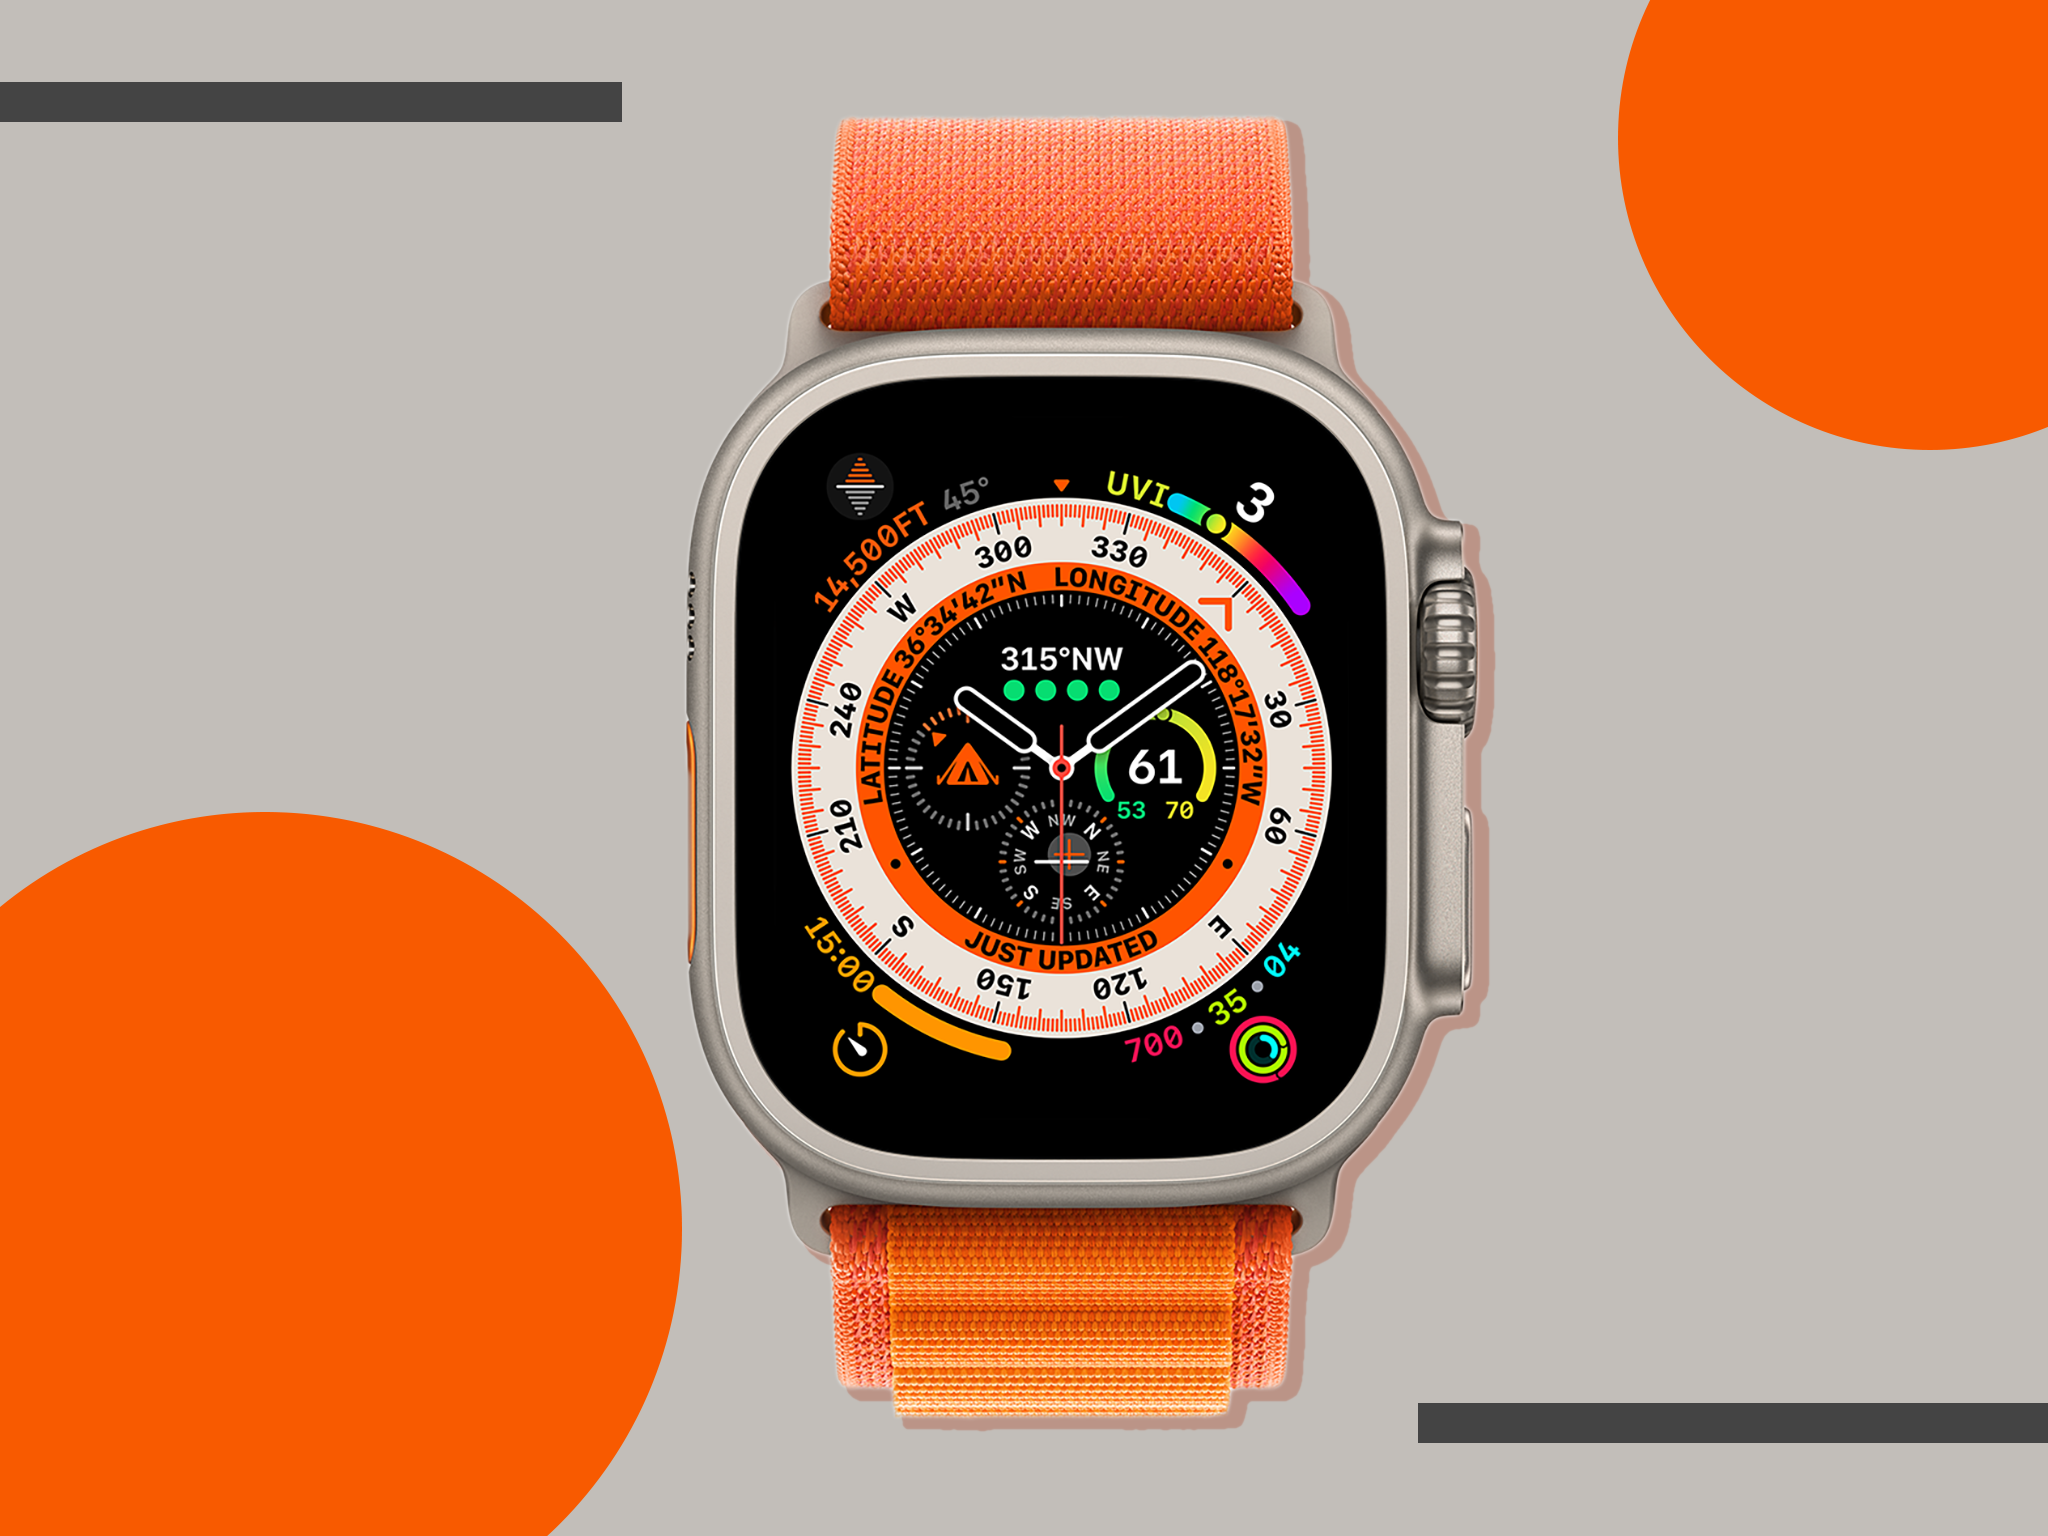 Apple Watch Ultra review 2022: Bigger display, longer battery life and more